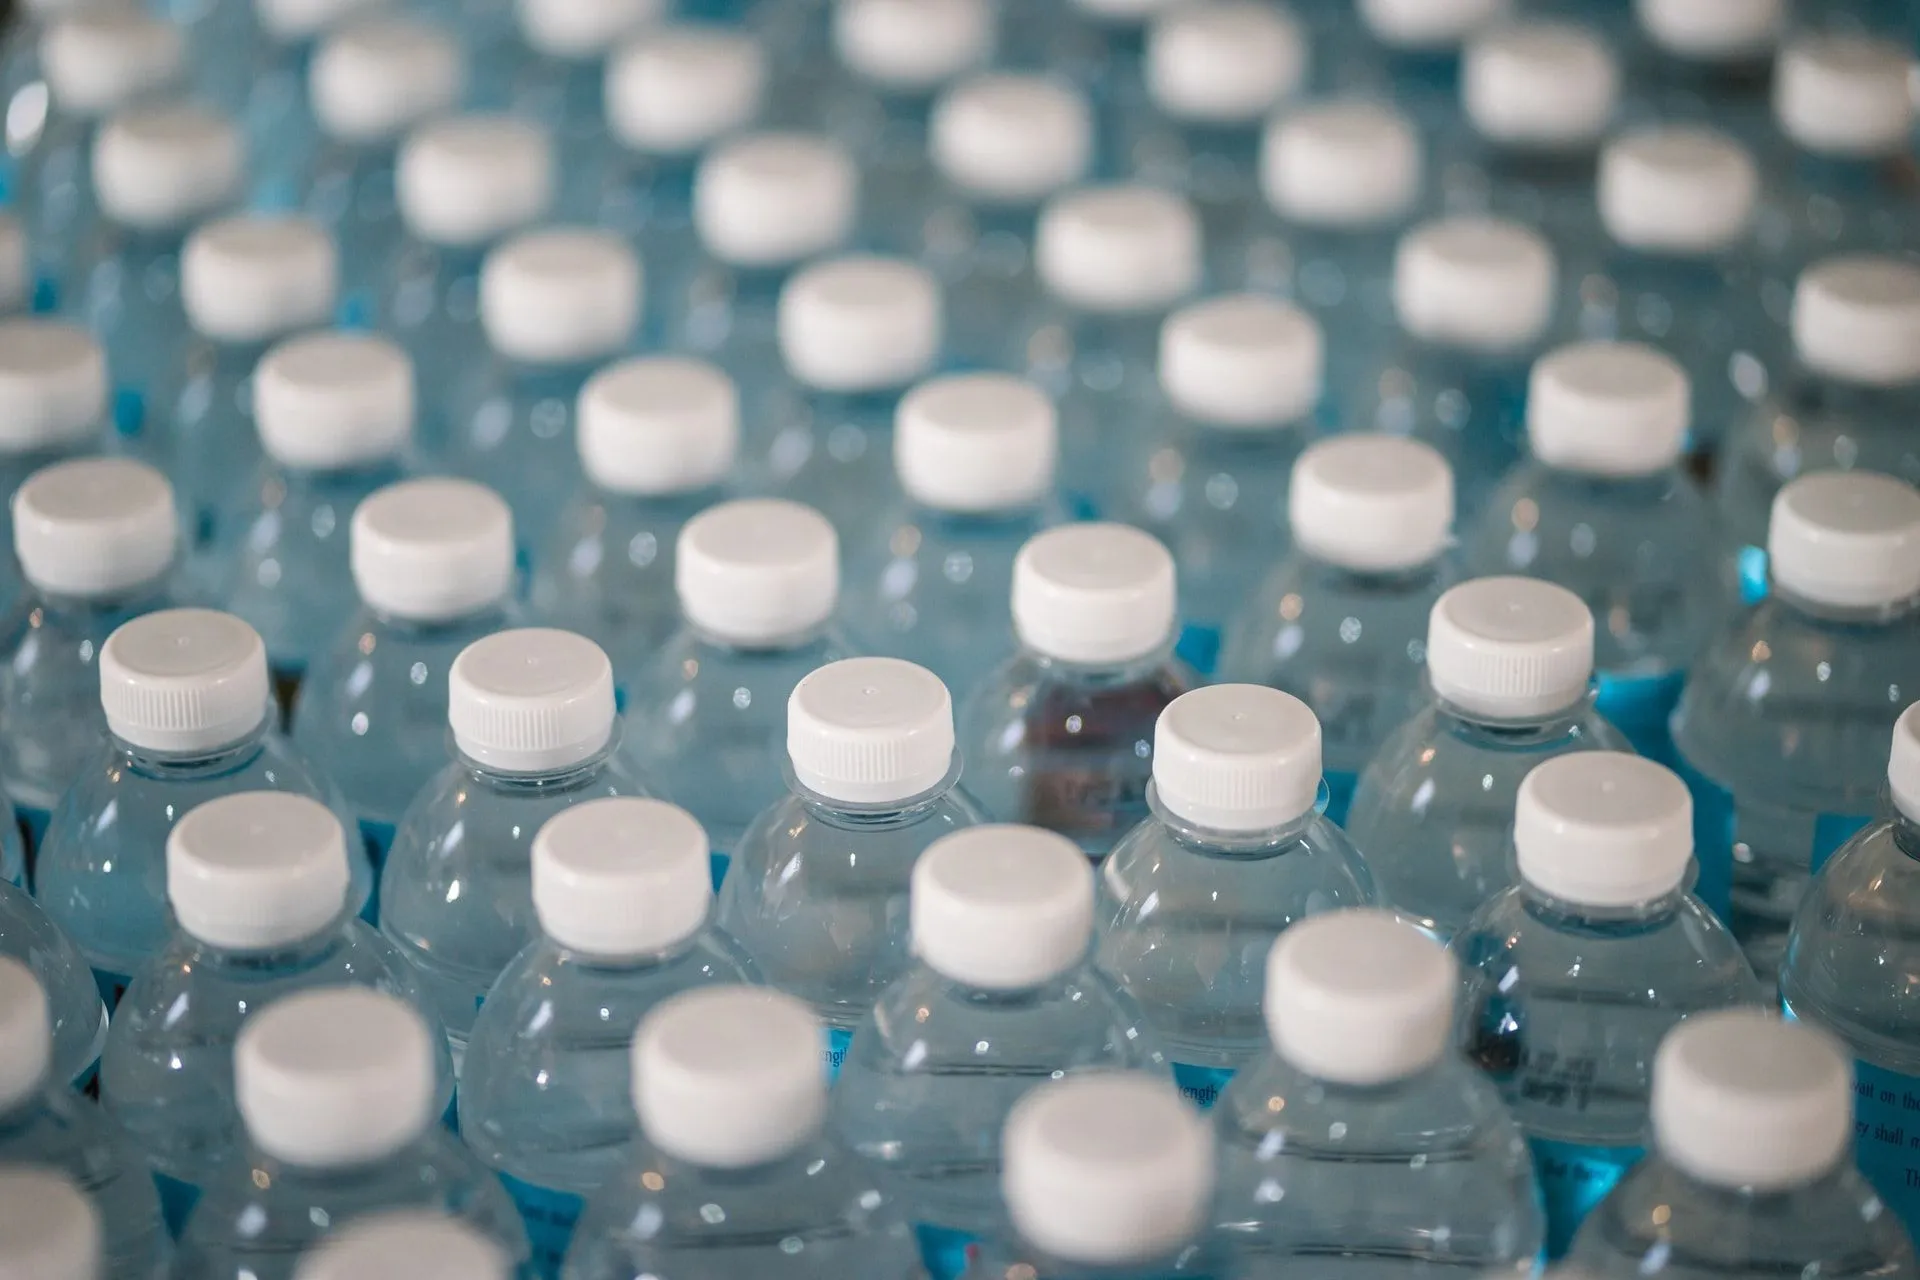 According to the Pacific Institute, producing plastic for bottled water in 2006 required 17 million barrels of oil for energy. These million barrels of oil could provide enough energy to power more than one million American vehicles and light trucks for a year.